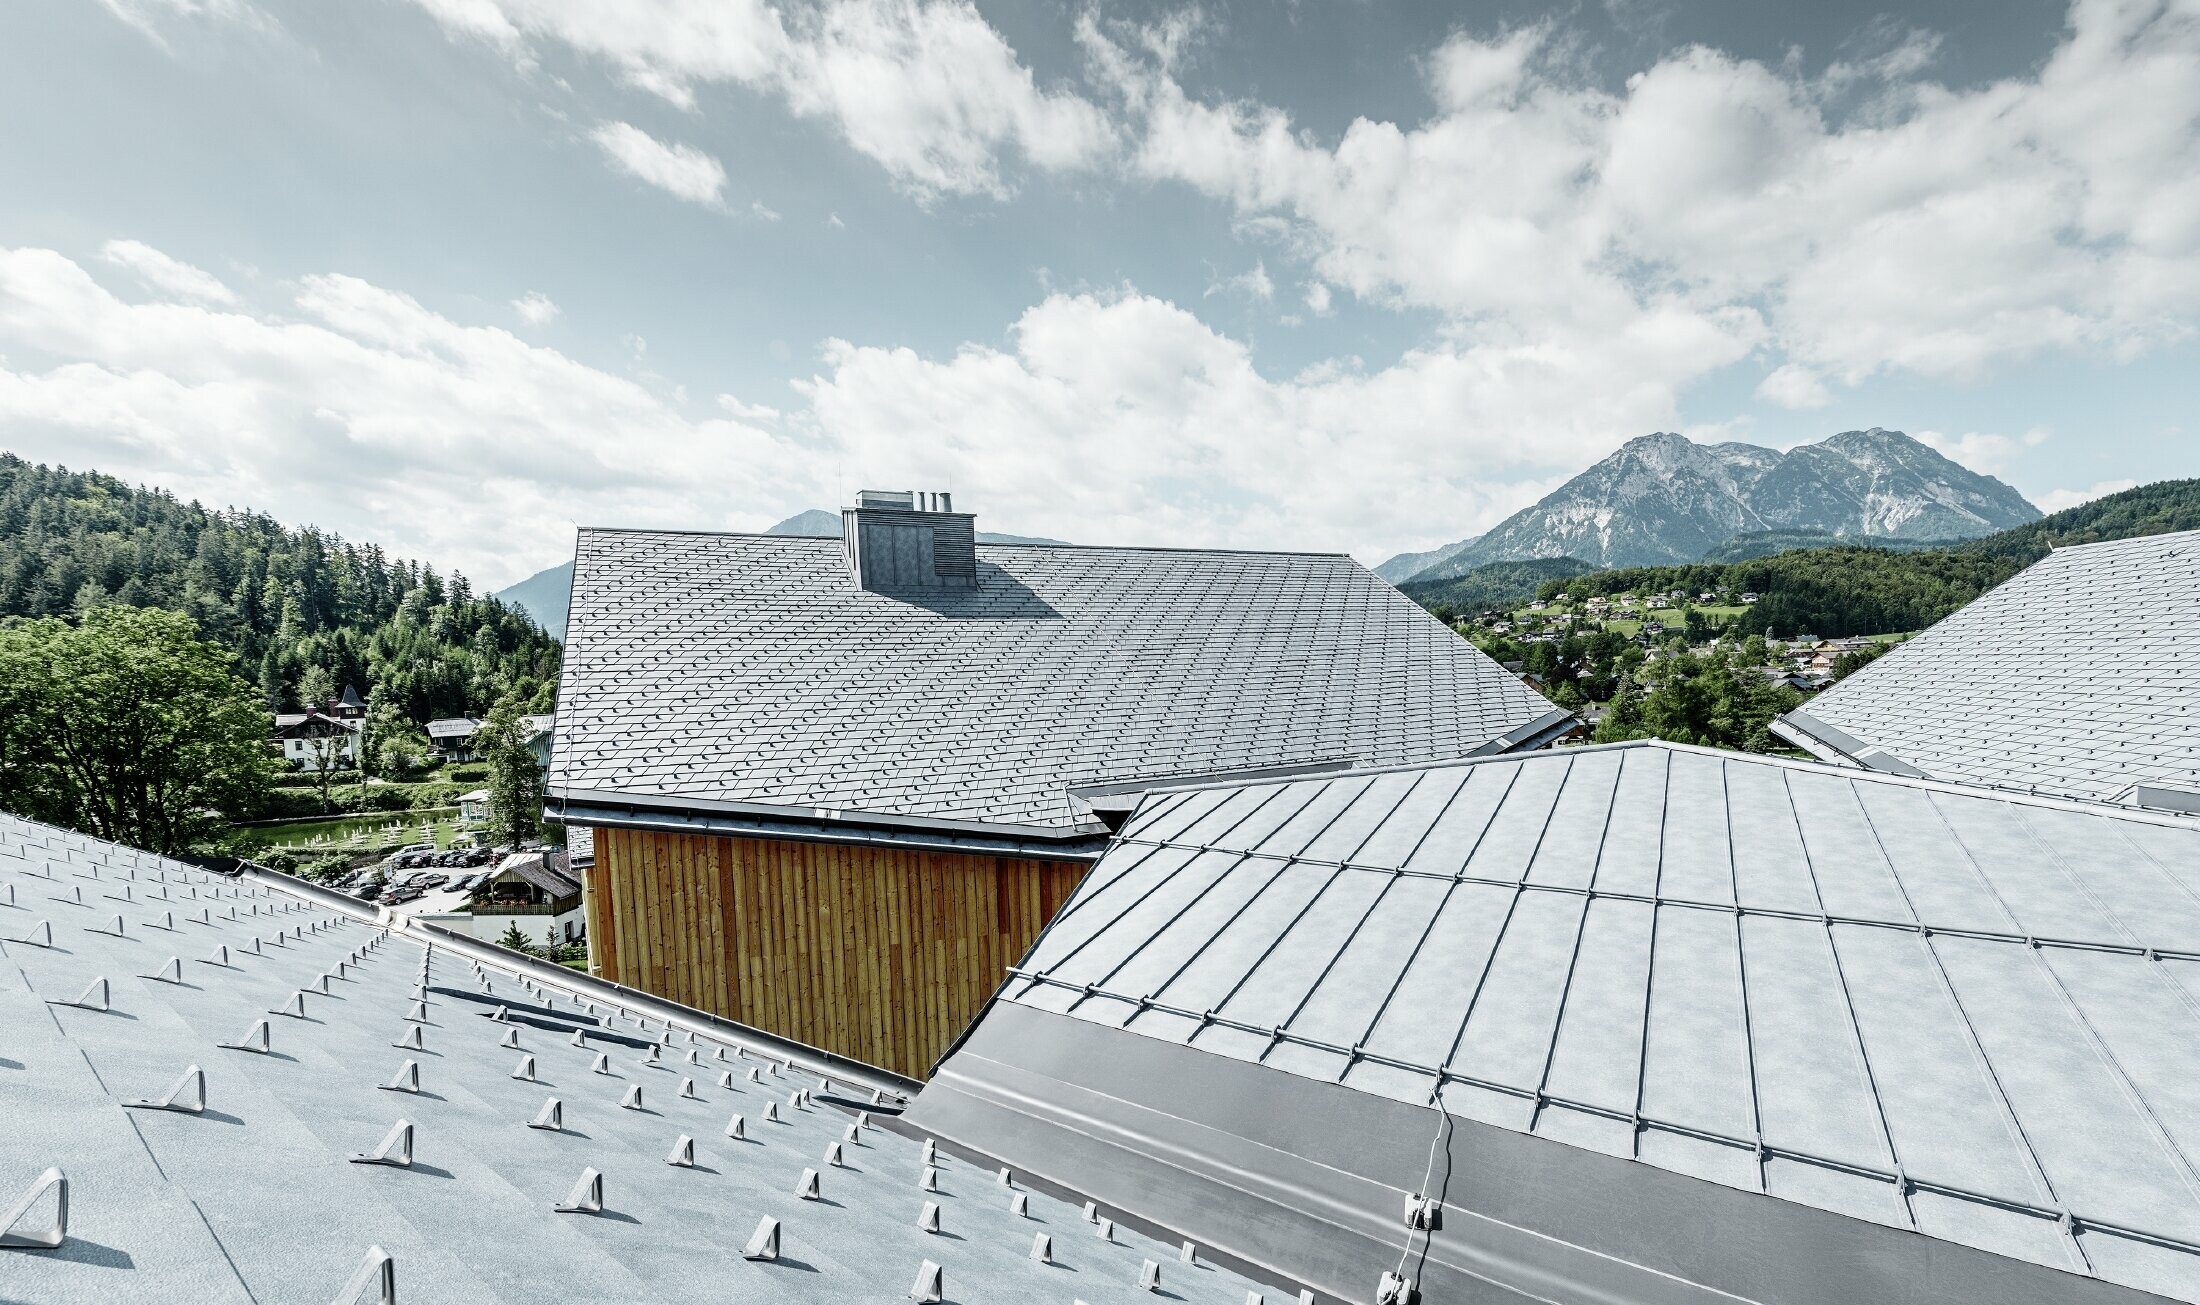 Hotel Vivamayr in Altaussee (Austria) with a wooden façade and PREFA shingle roof